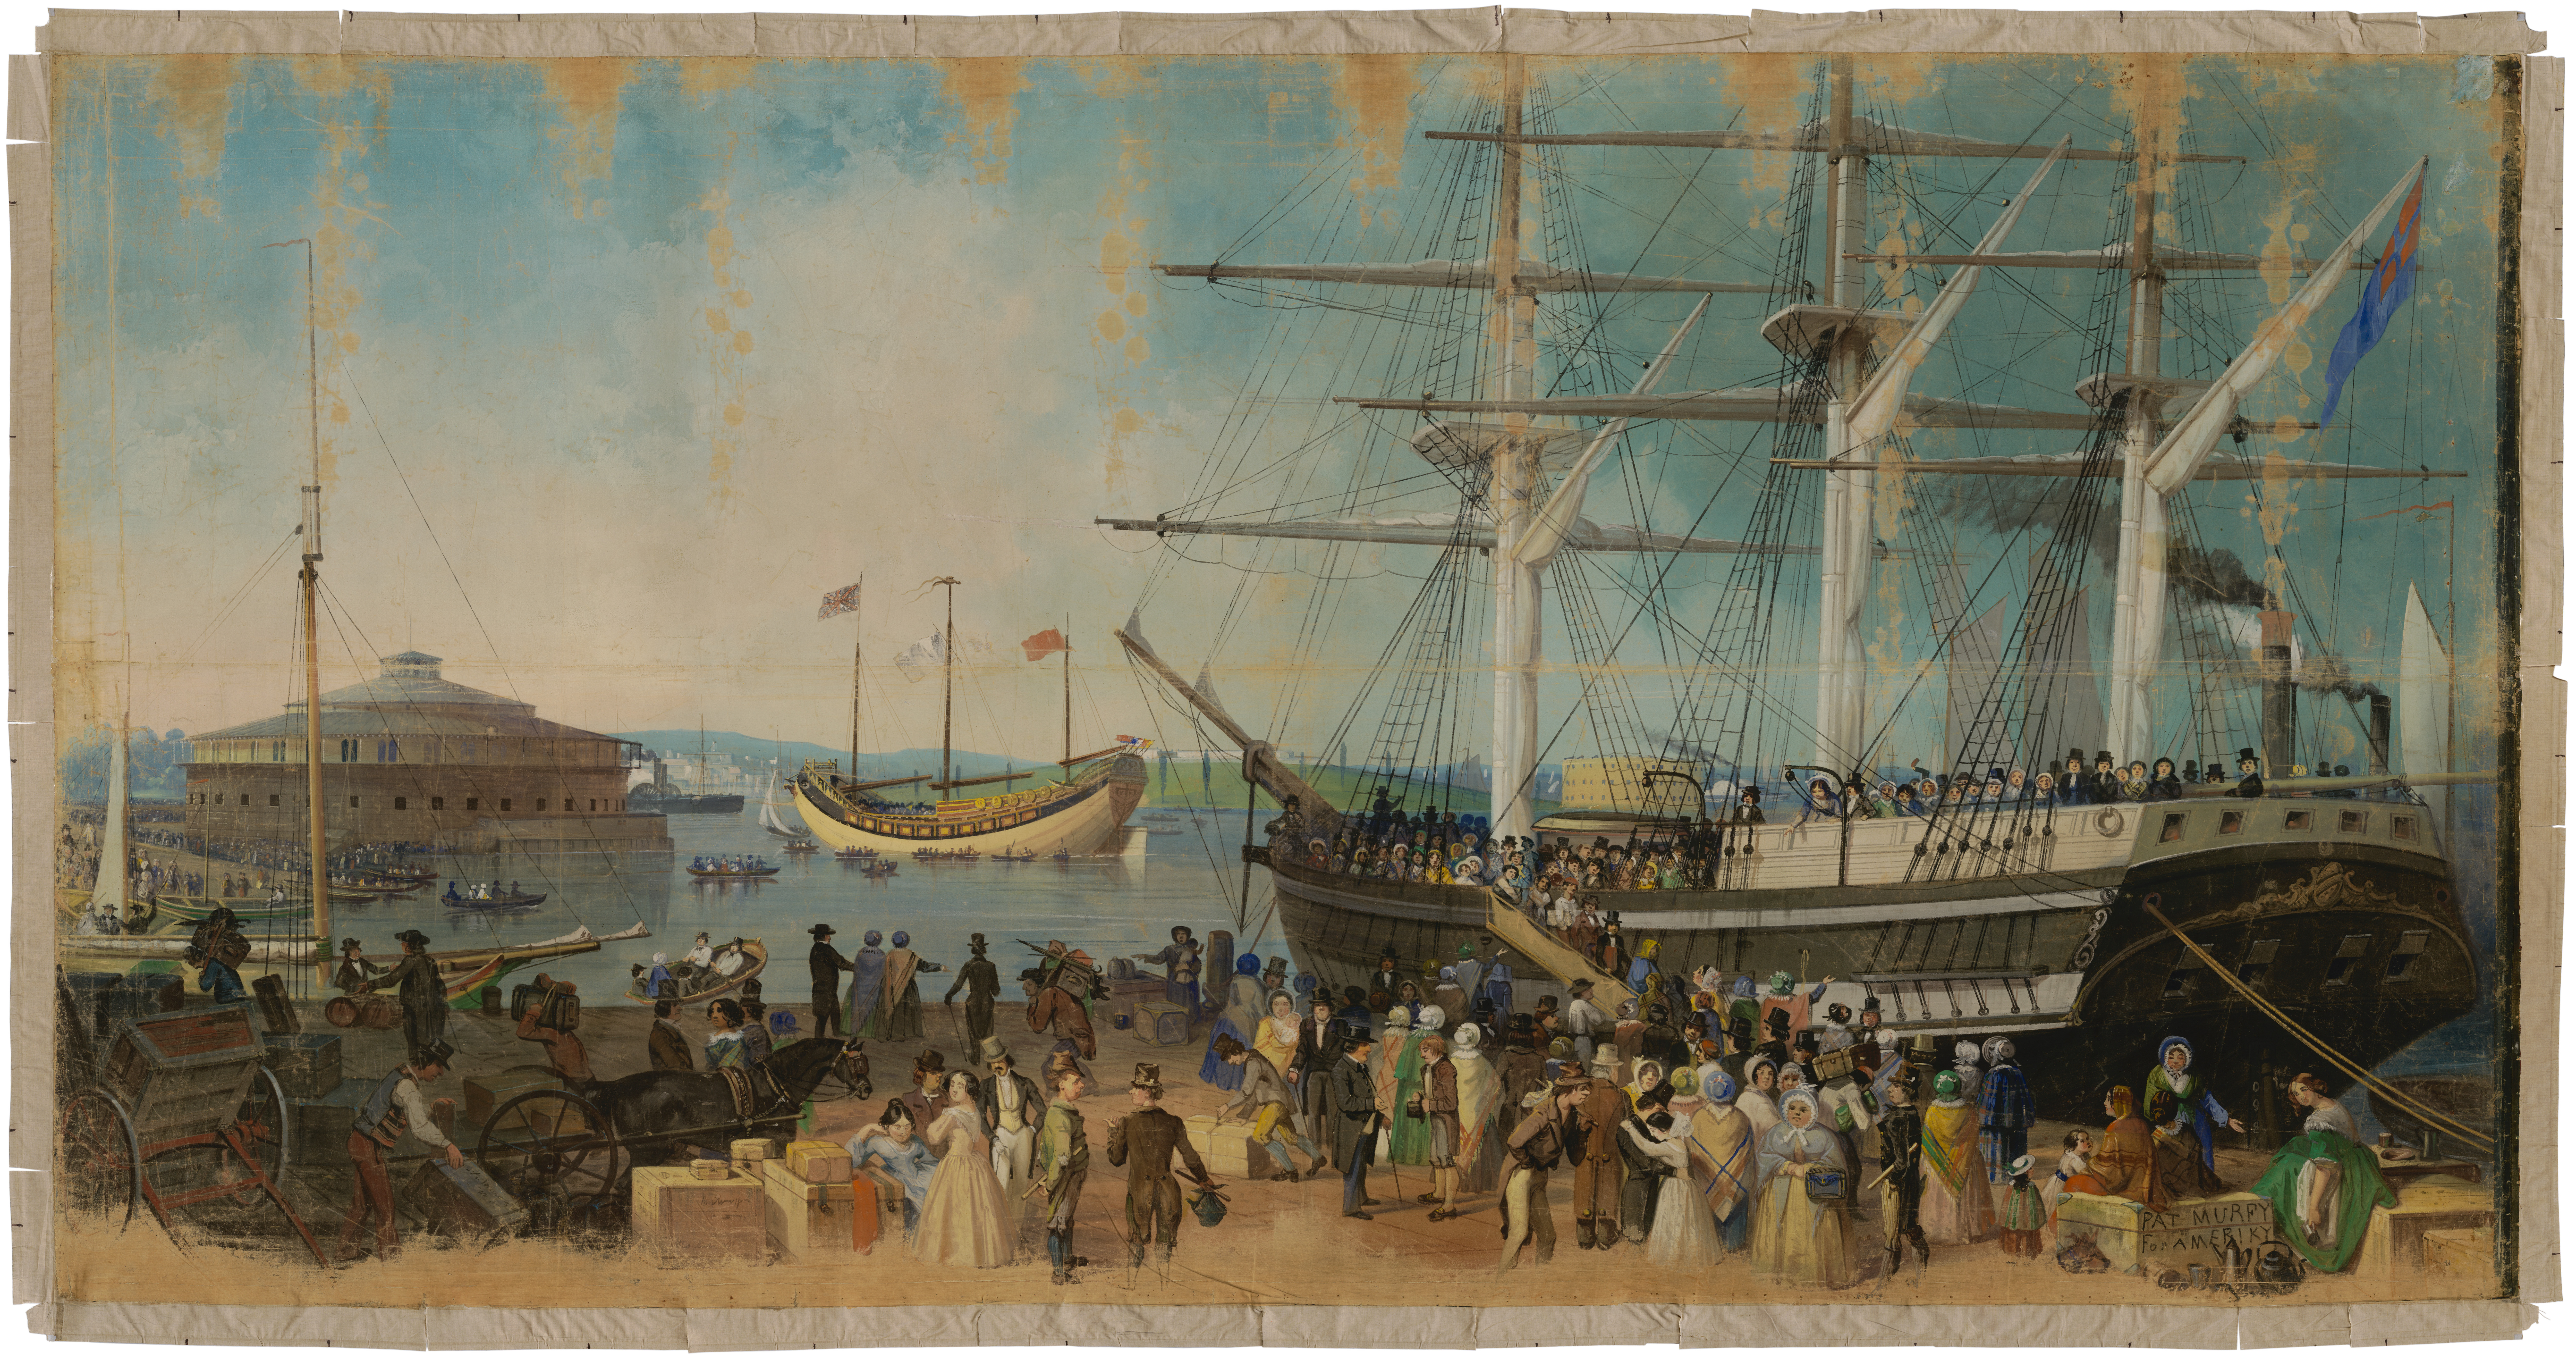 A 19th century painting on a harbor with many people on the street next to a large ship. 